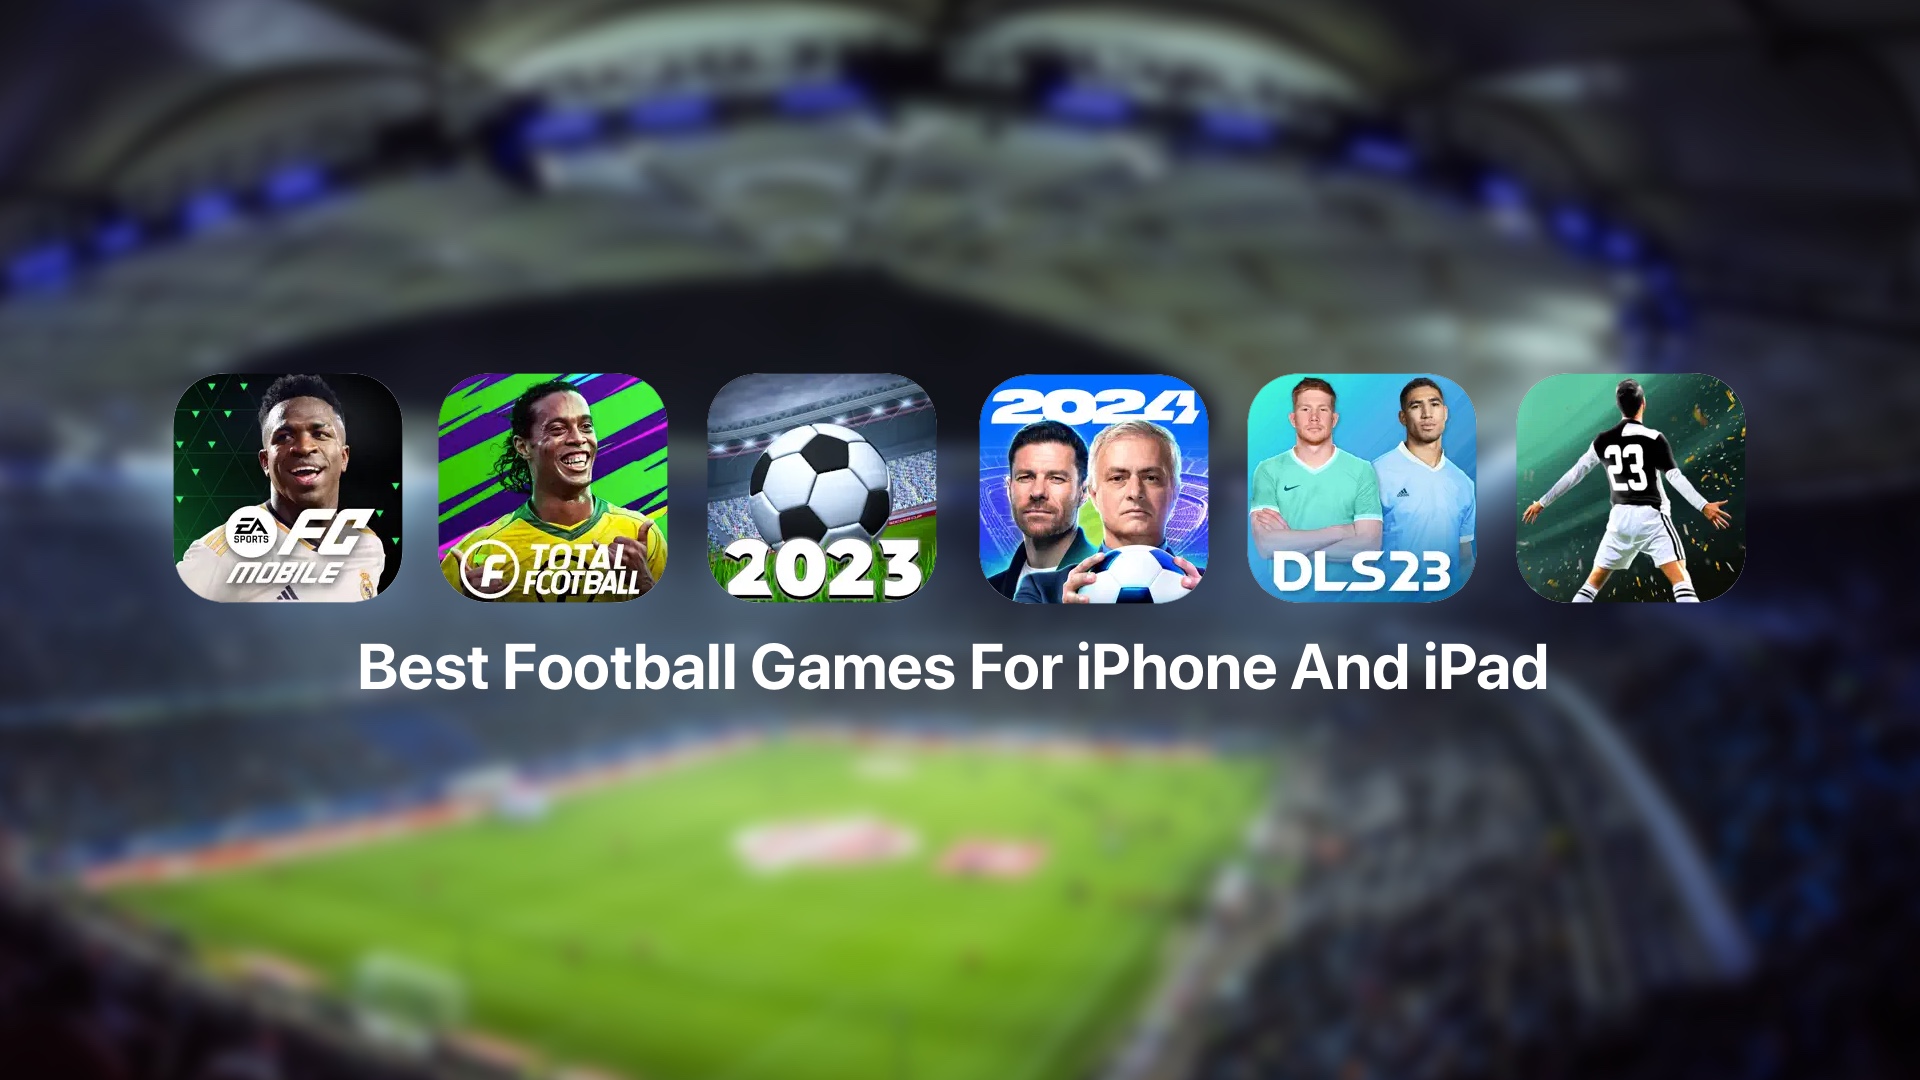 Getting Bored? Play the Most Exciting Soccer Games Online Right Now!